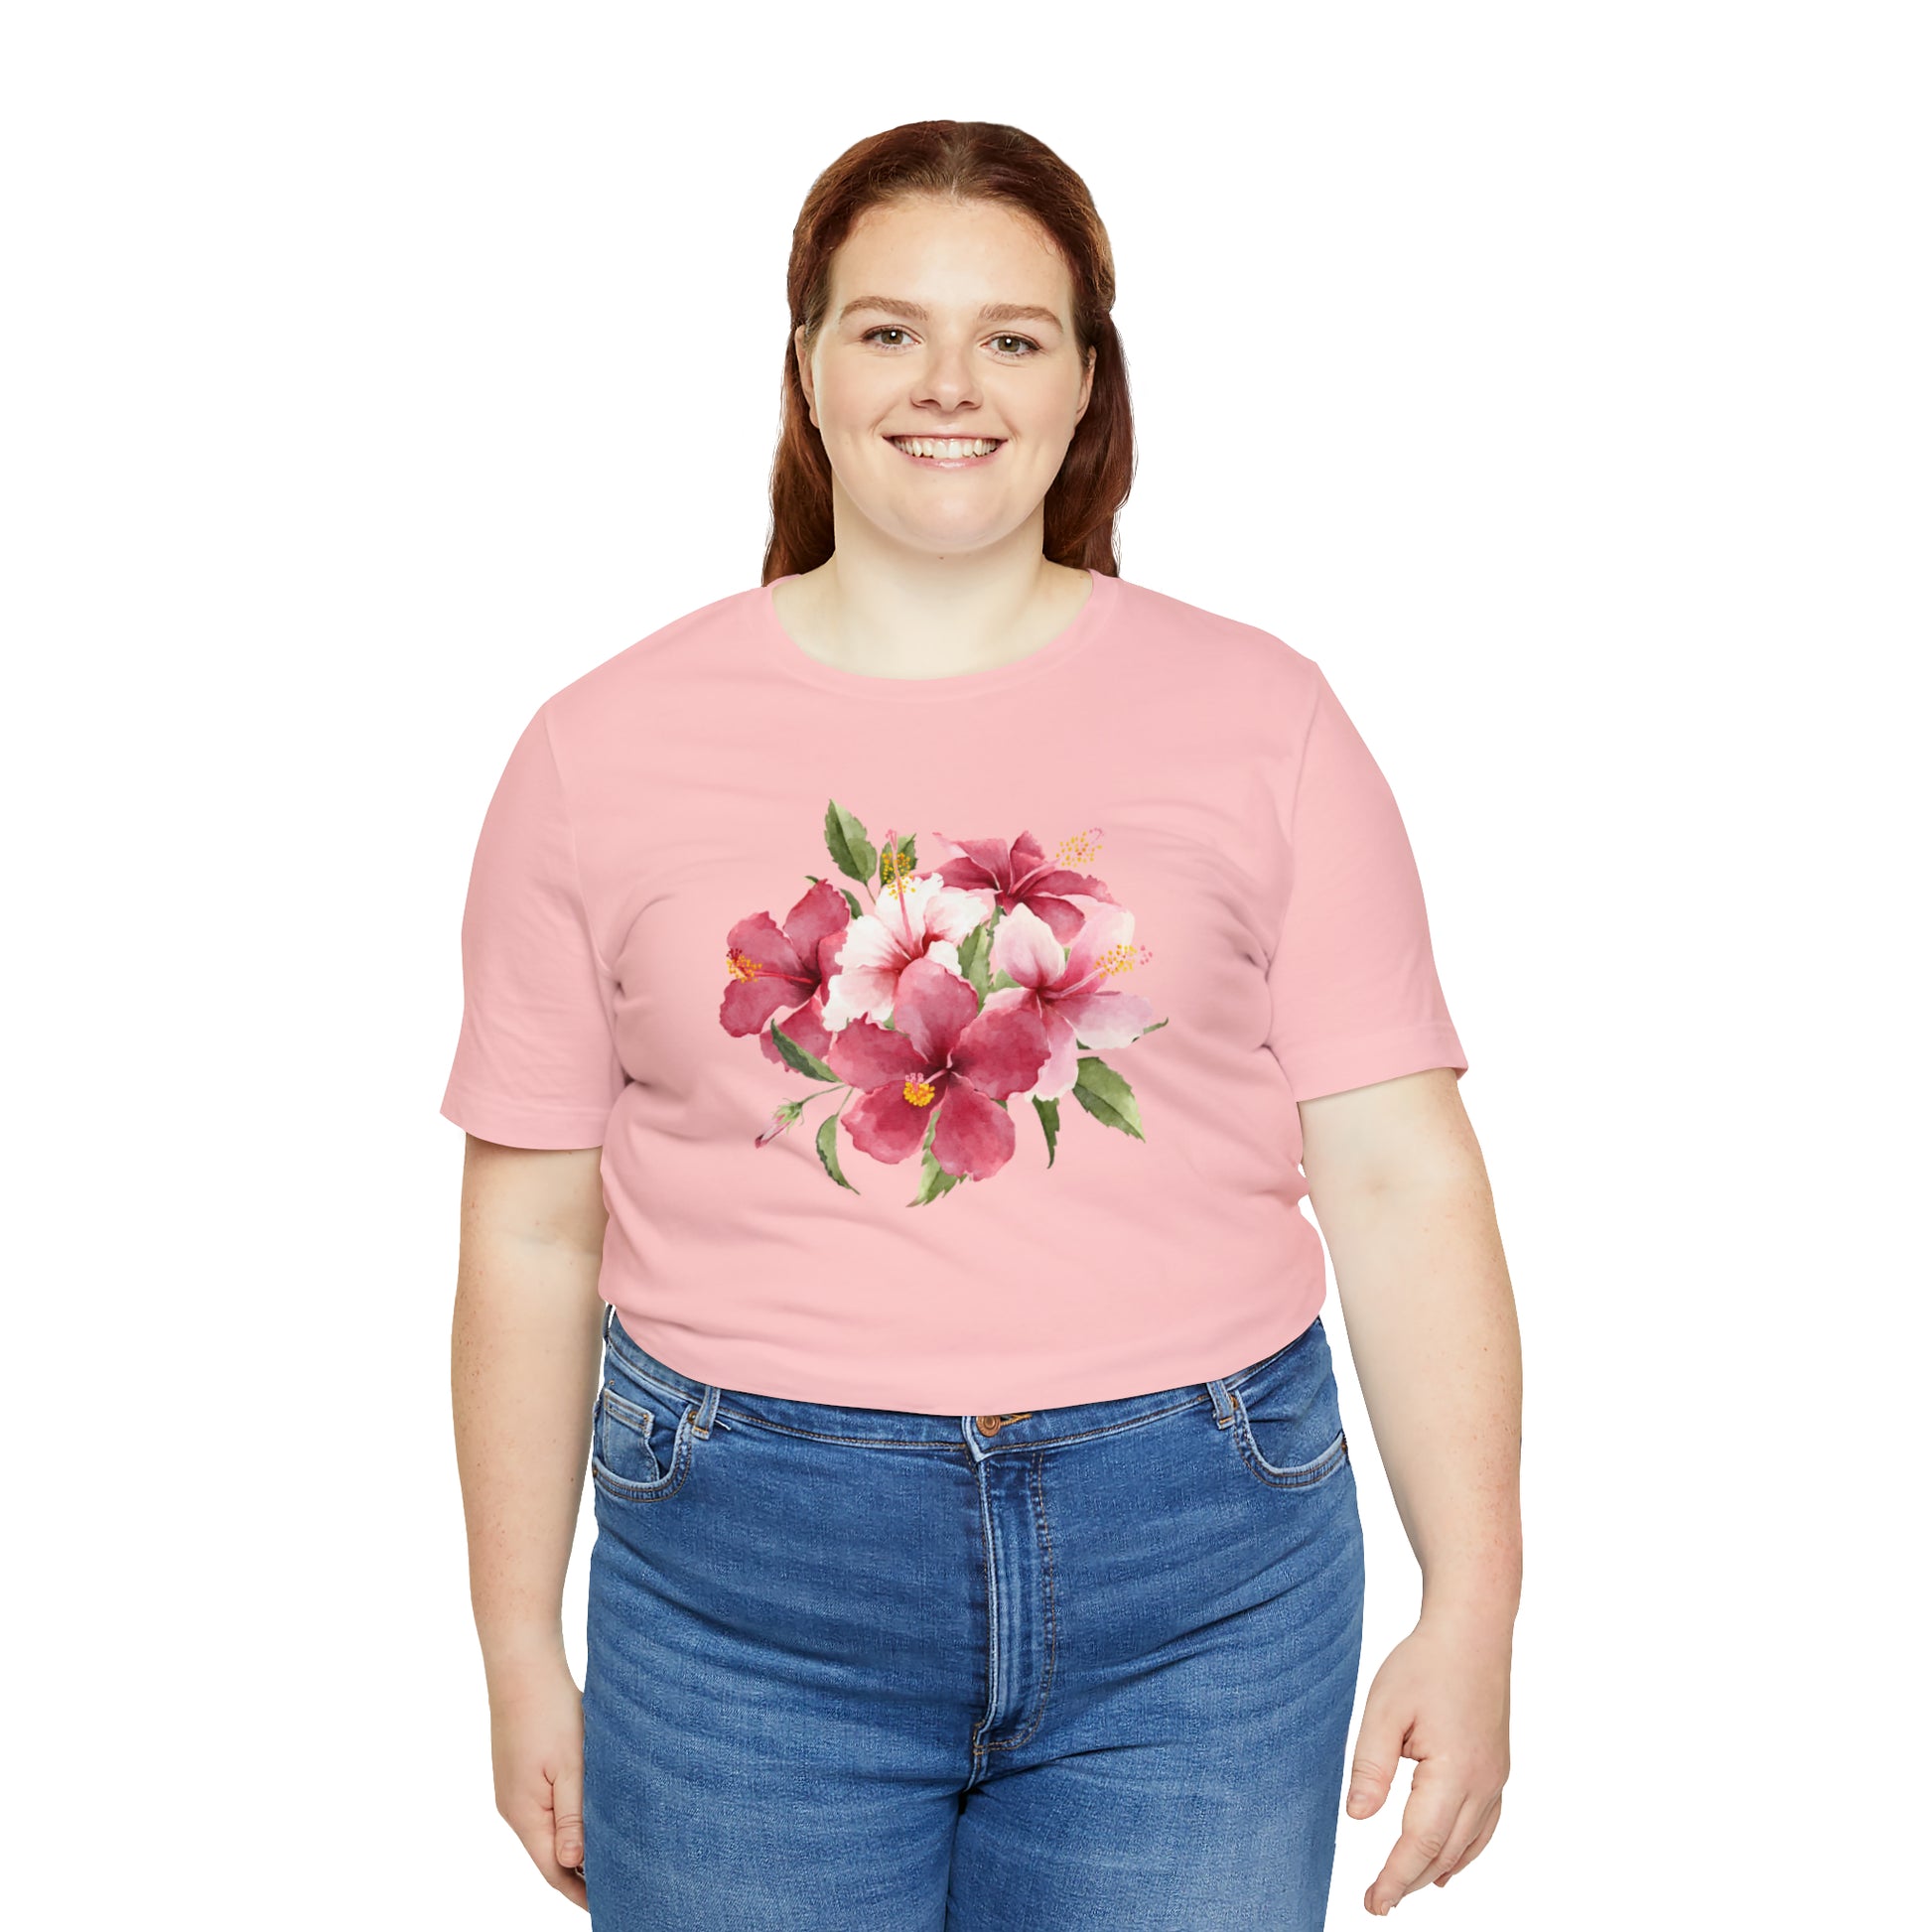 Mock up of a plus-size woman wearing the Pink shirt